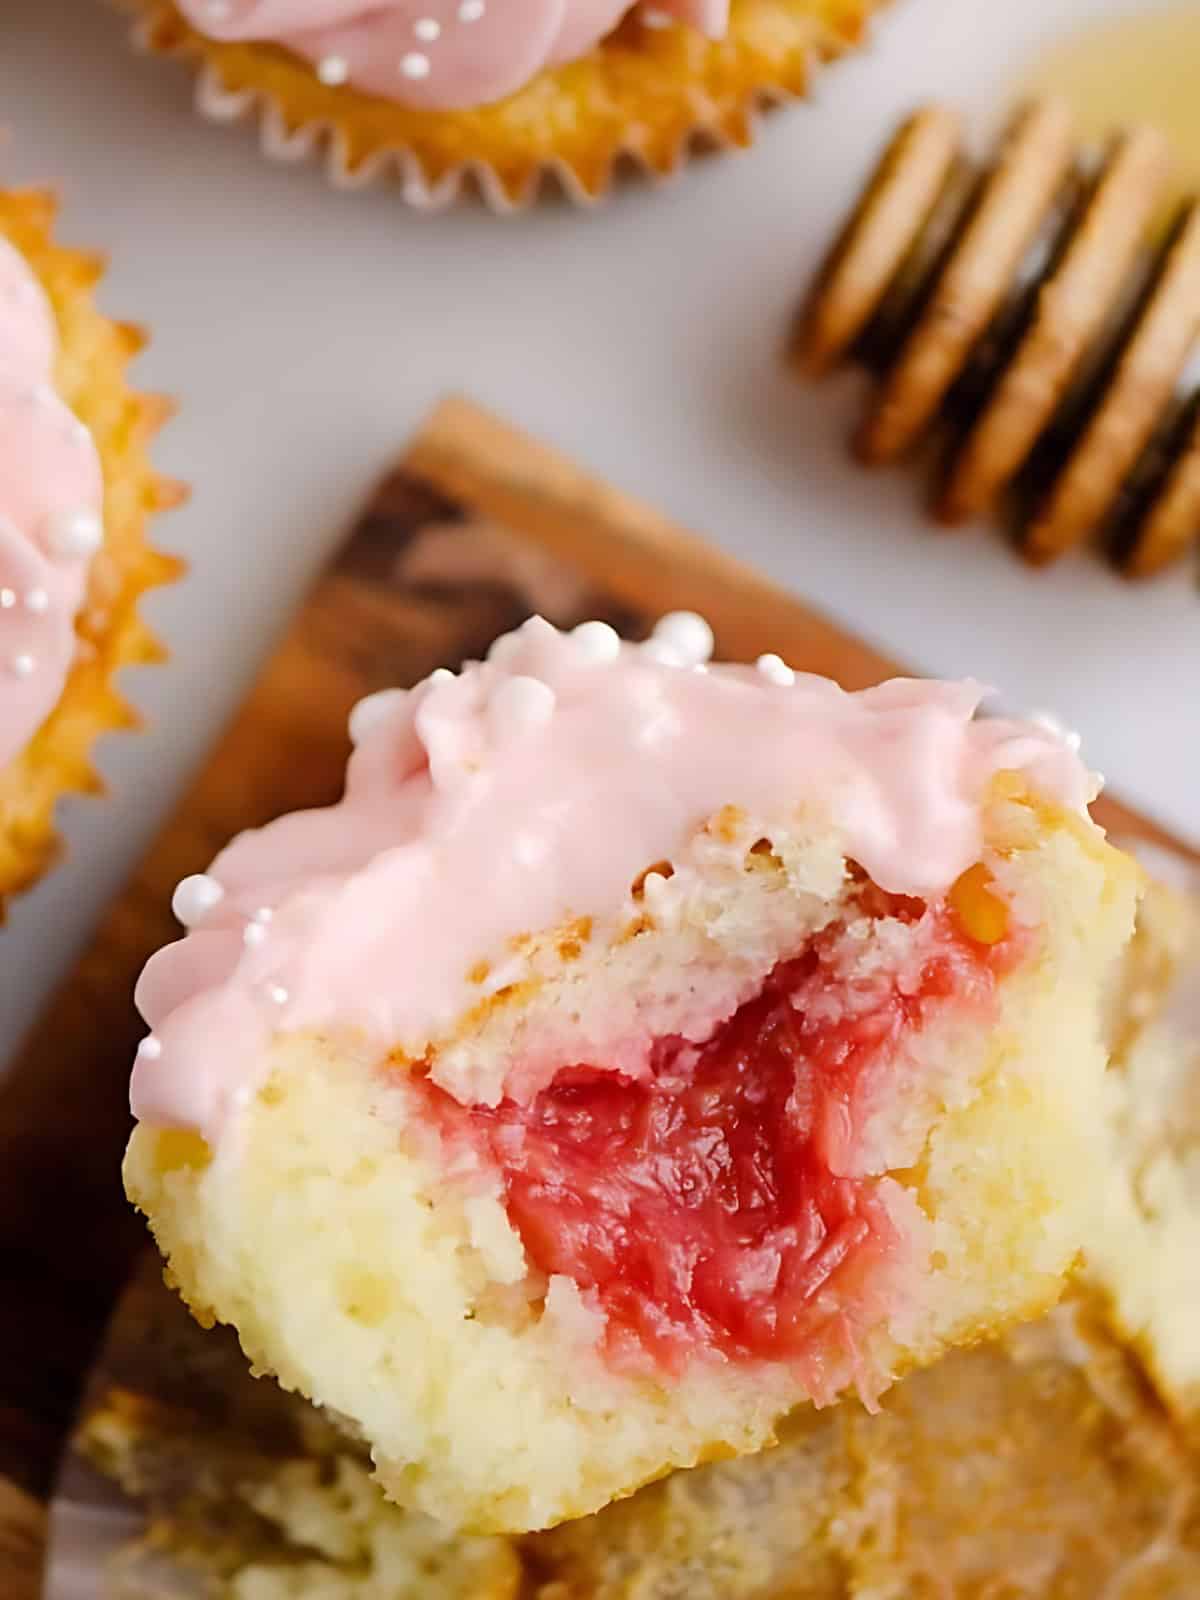 Rhubarb honey cupcakes with filling.